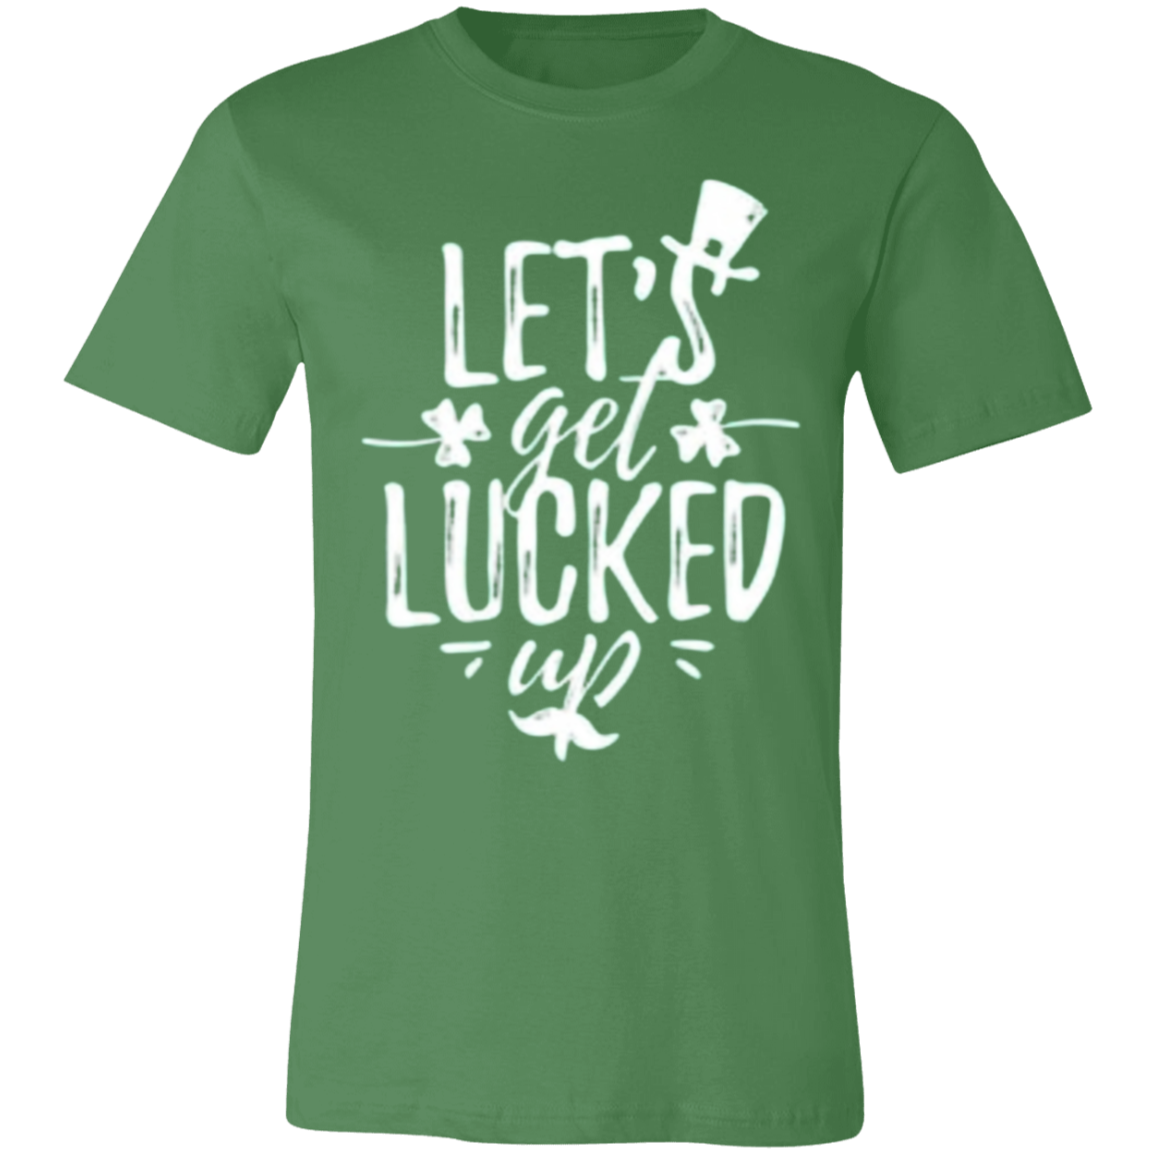 Let's get Lucked Up Tee